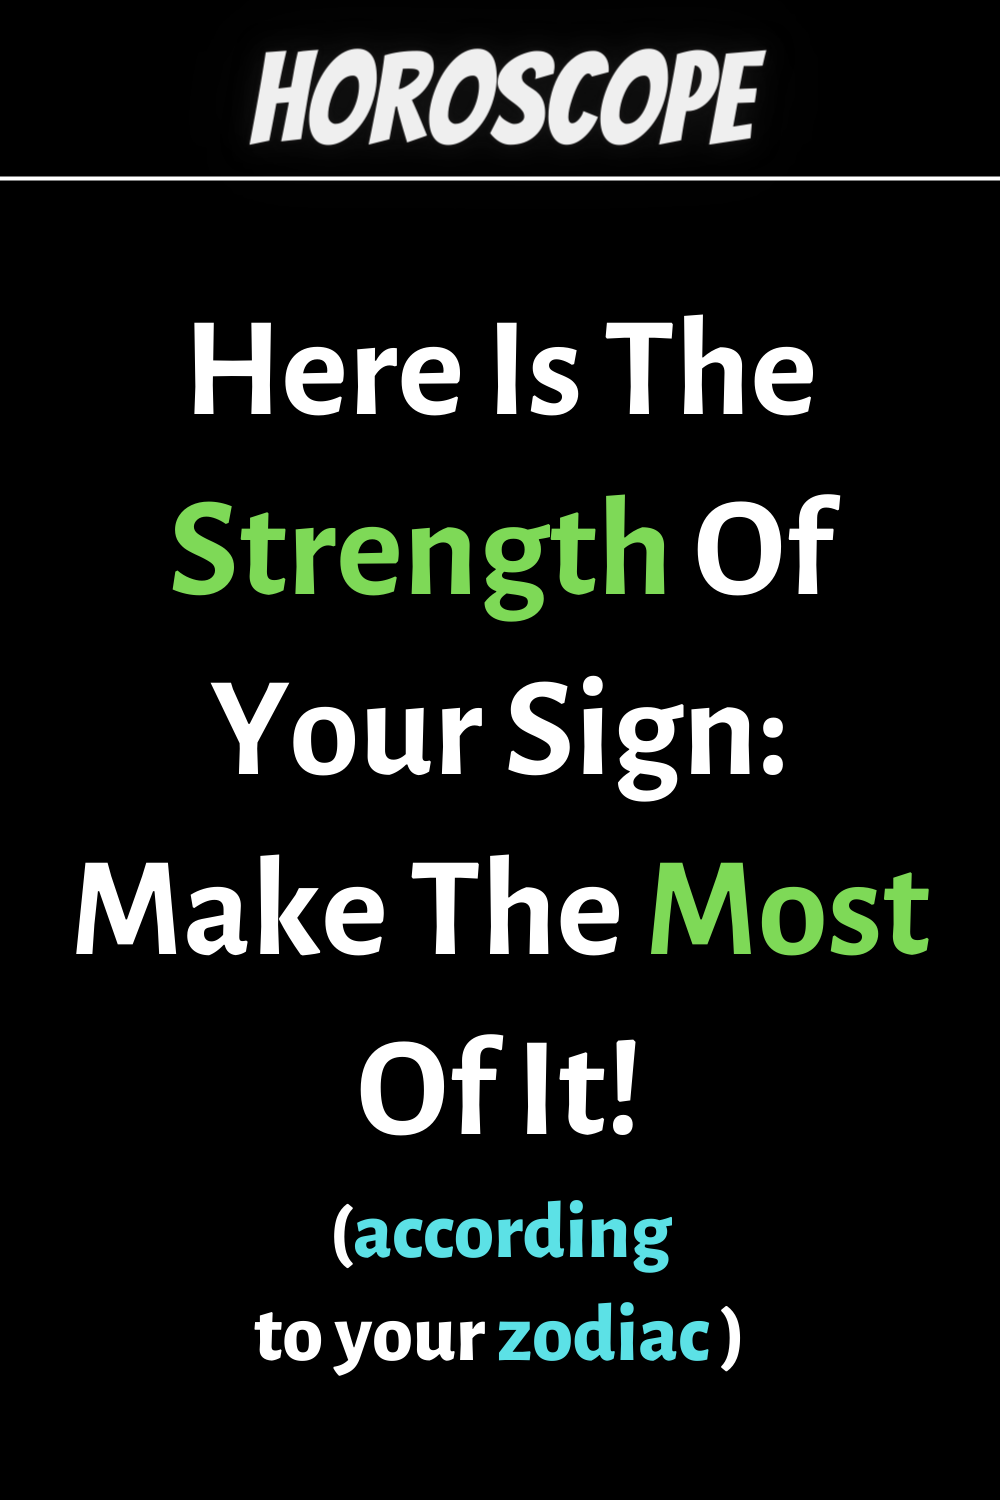 Here Is The Strength Of Your Zodiac Sign: Make The Most Of It!